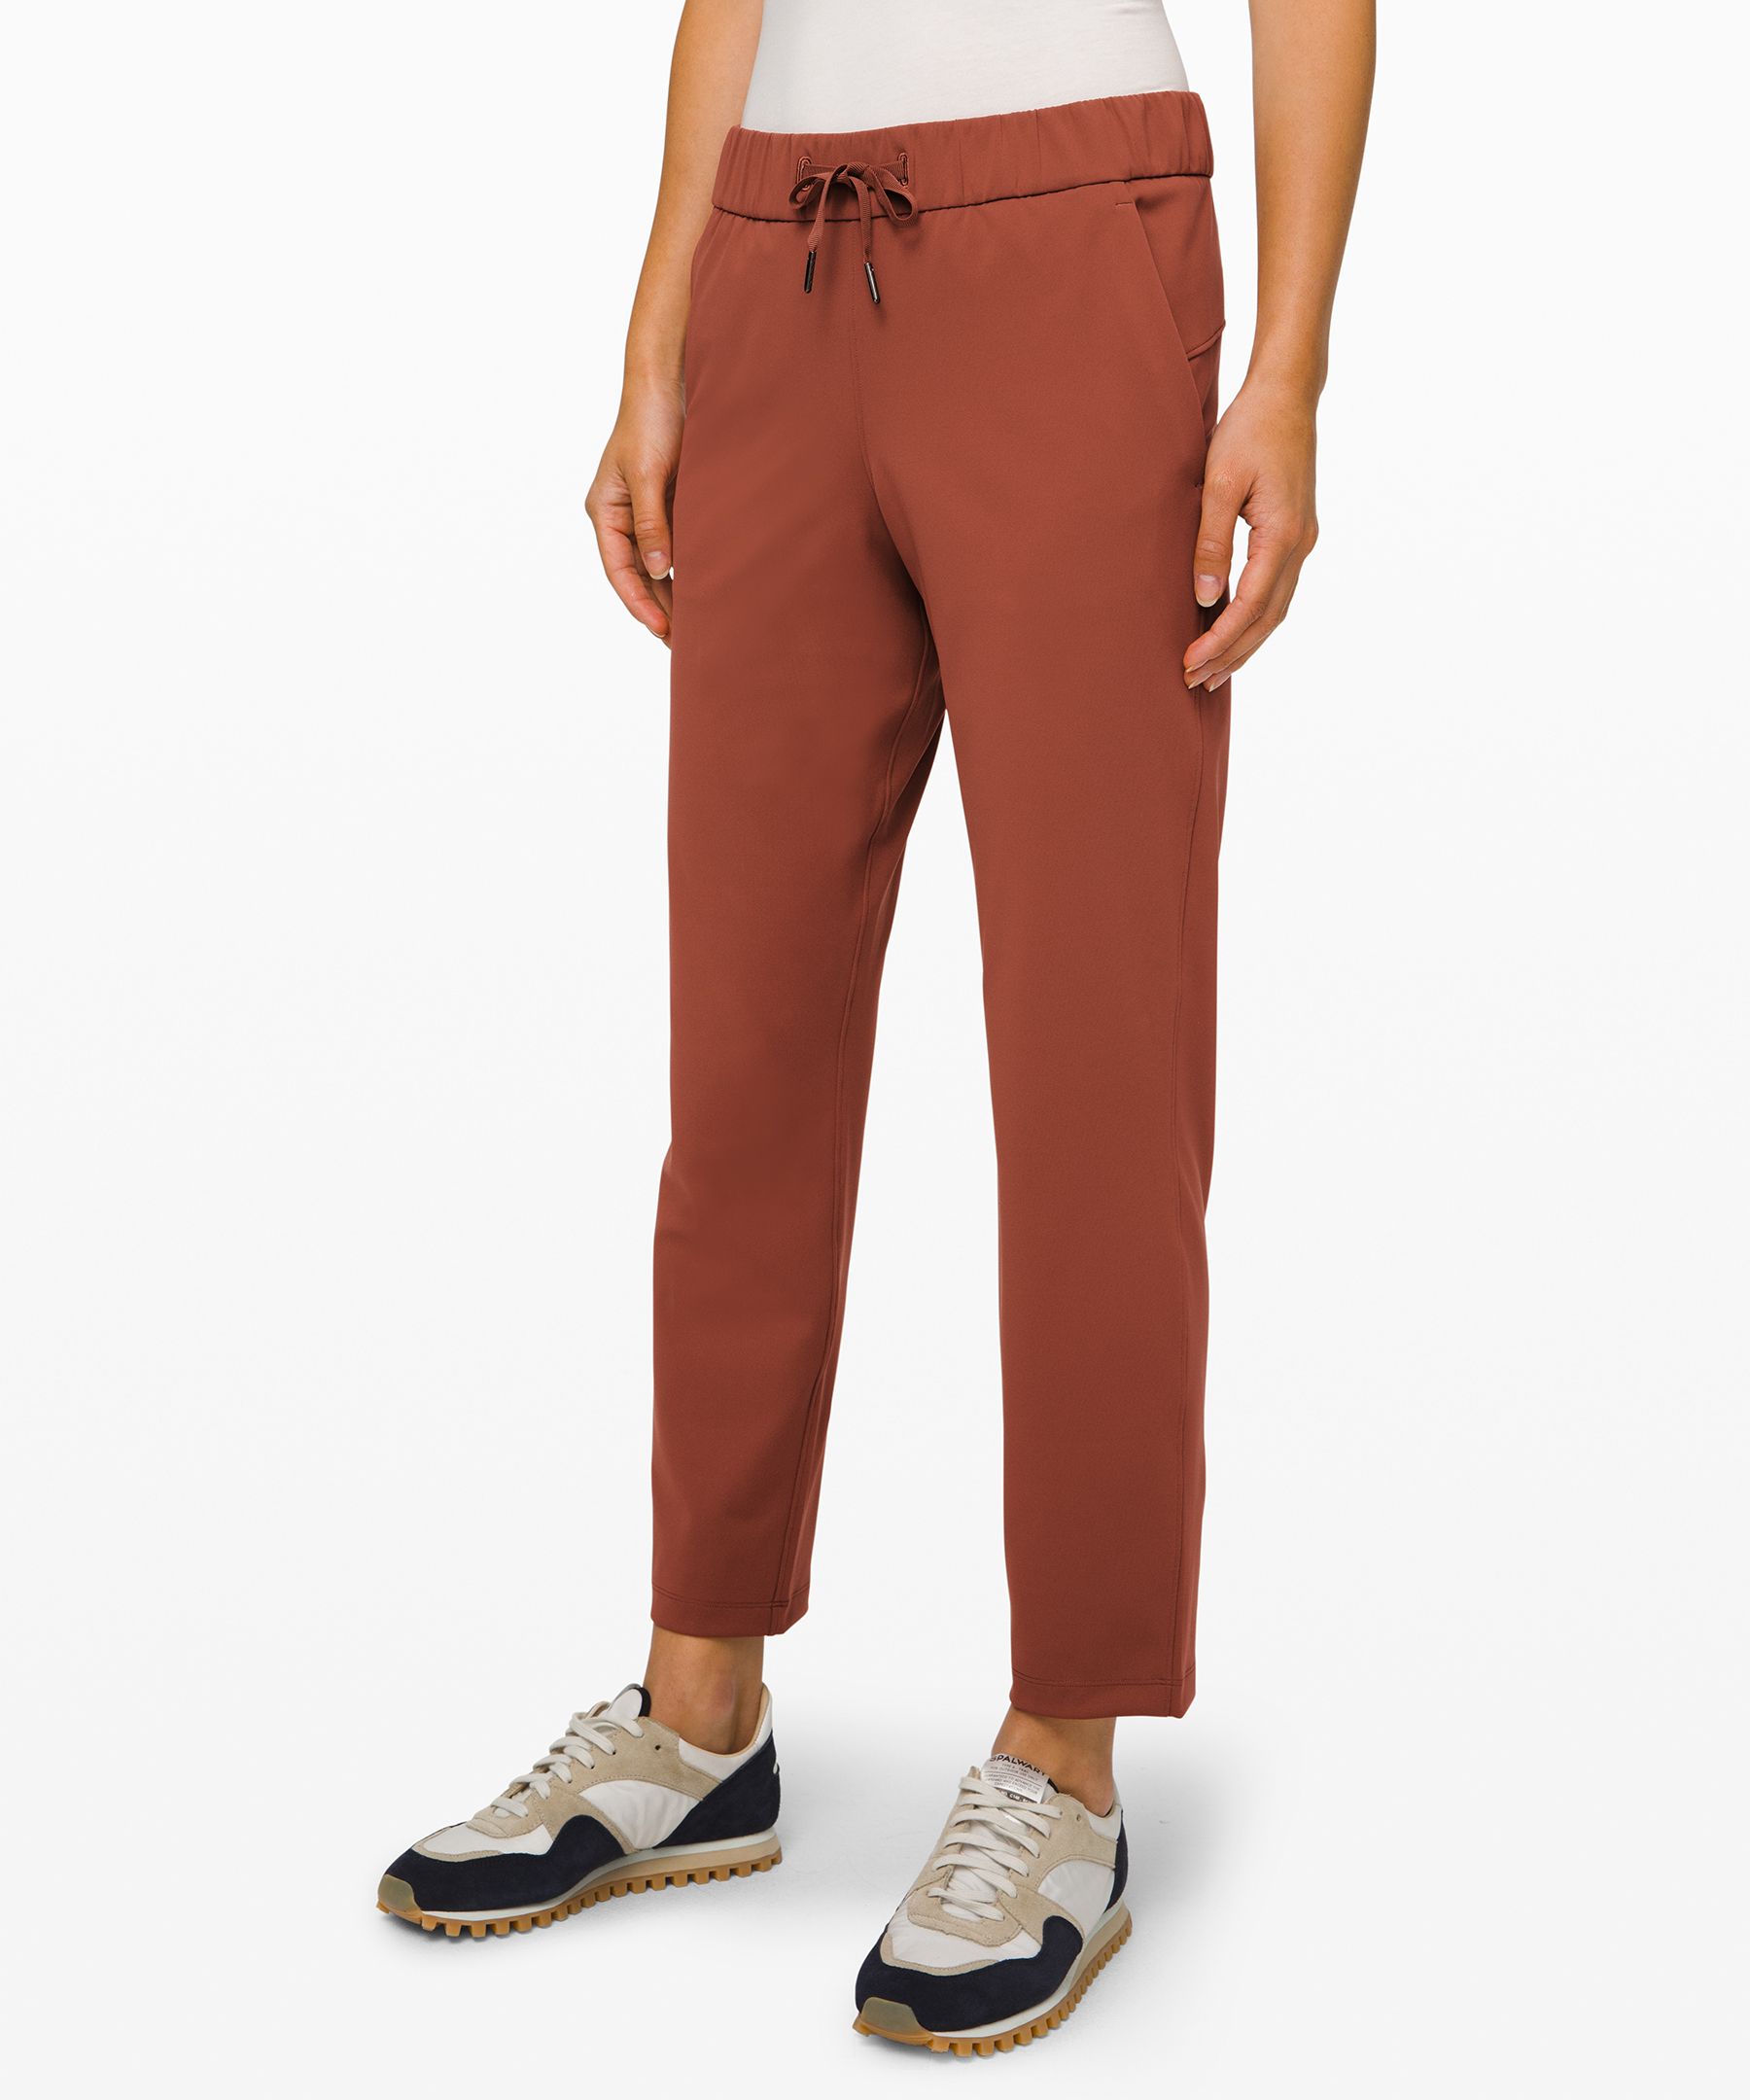 Lululemon On The Fly 7/8 Pant In Rustic Clay